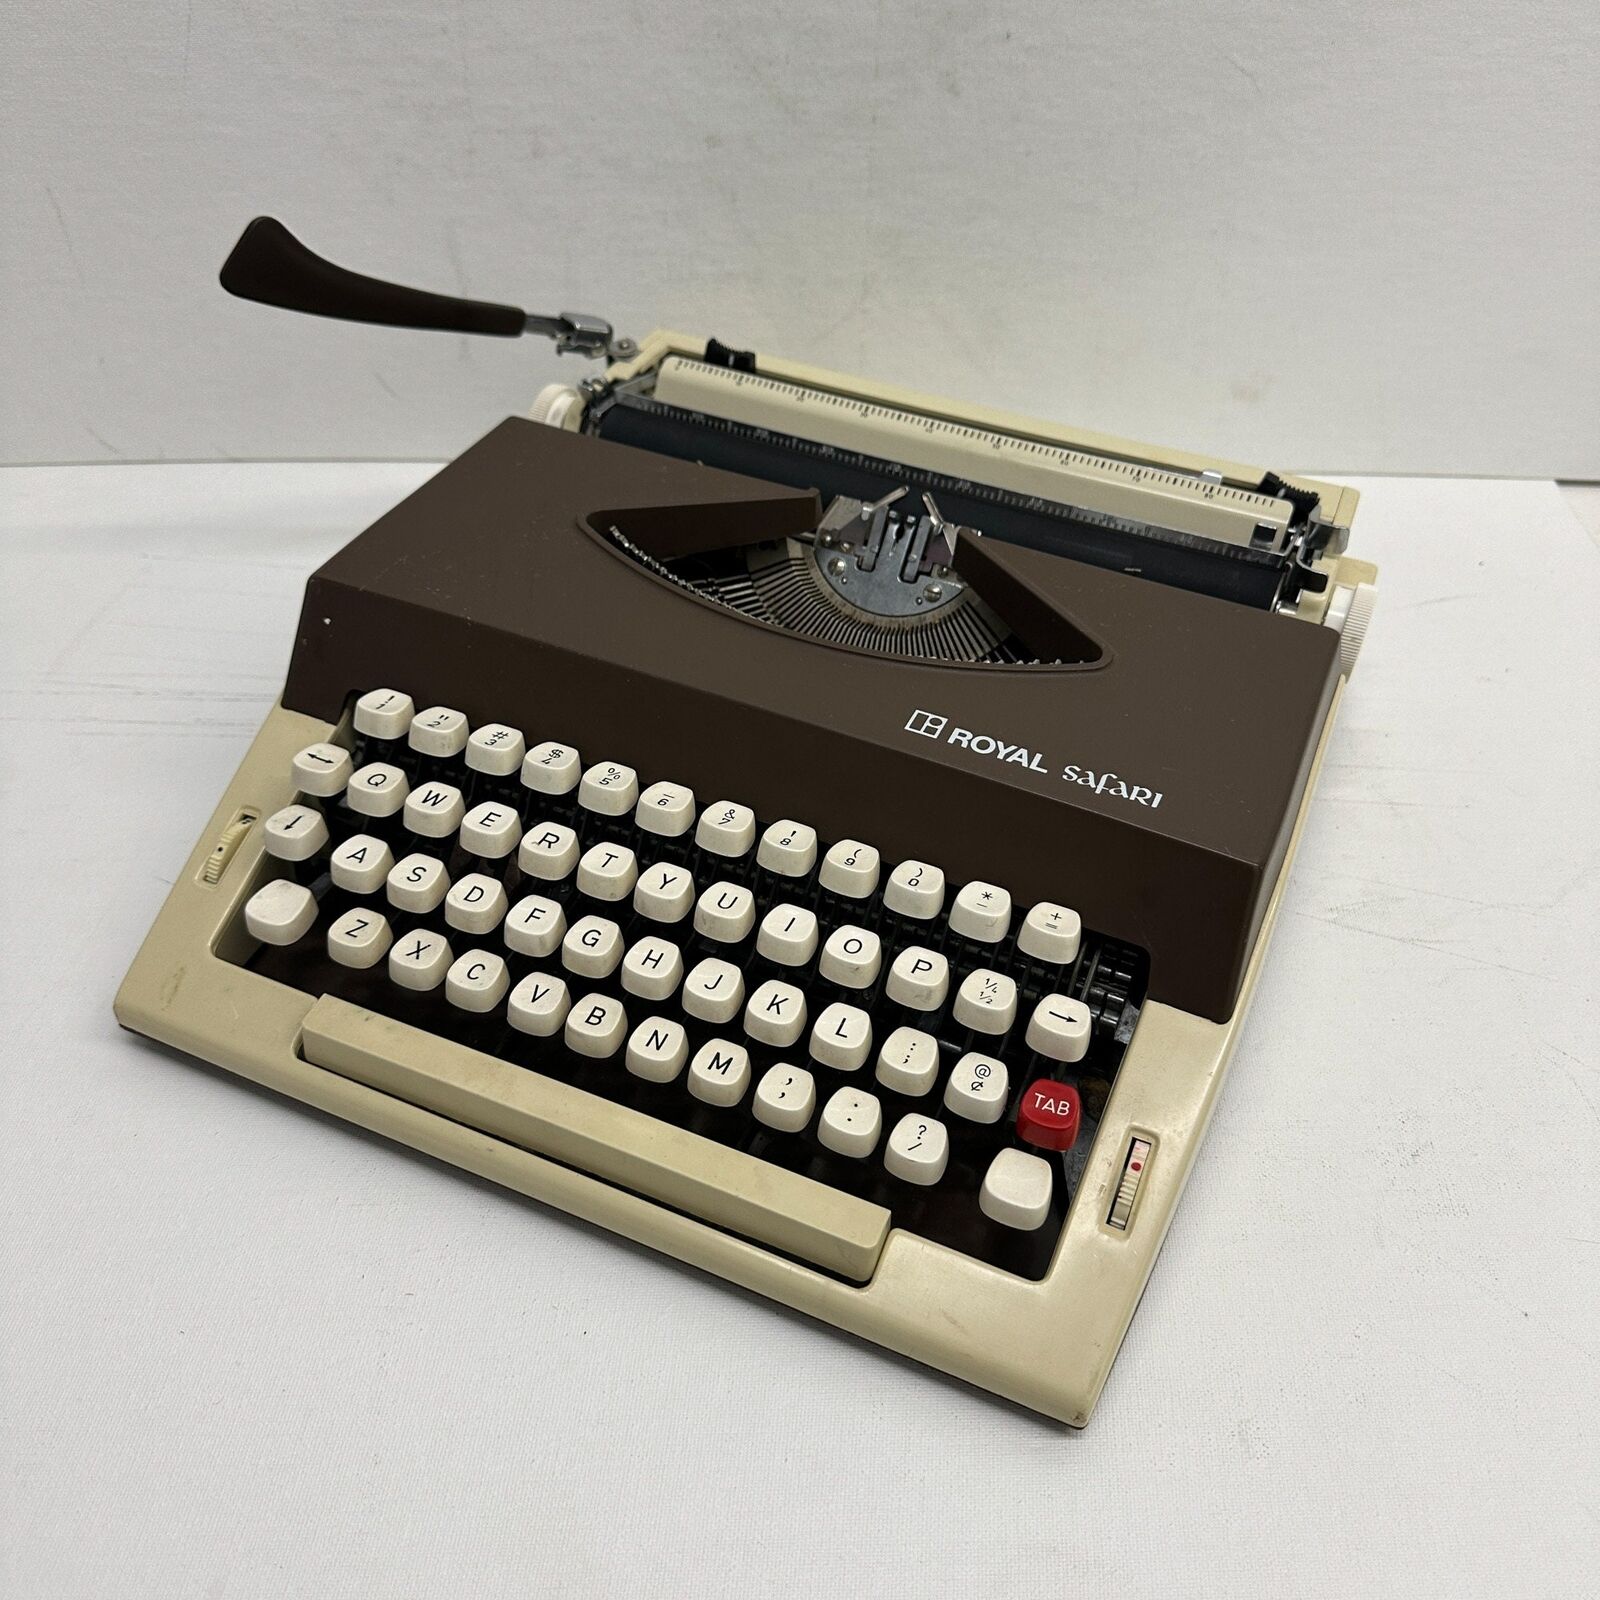 1960s Royal Safari Portable Typewriter in Working Condition With Case